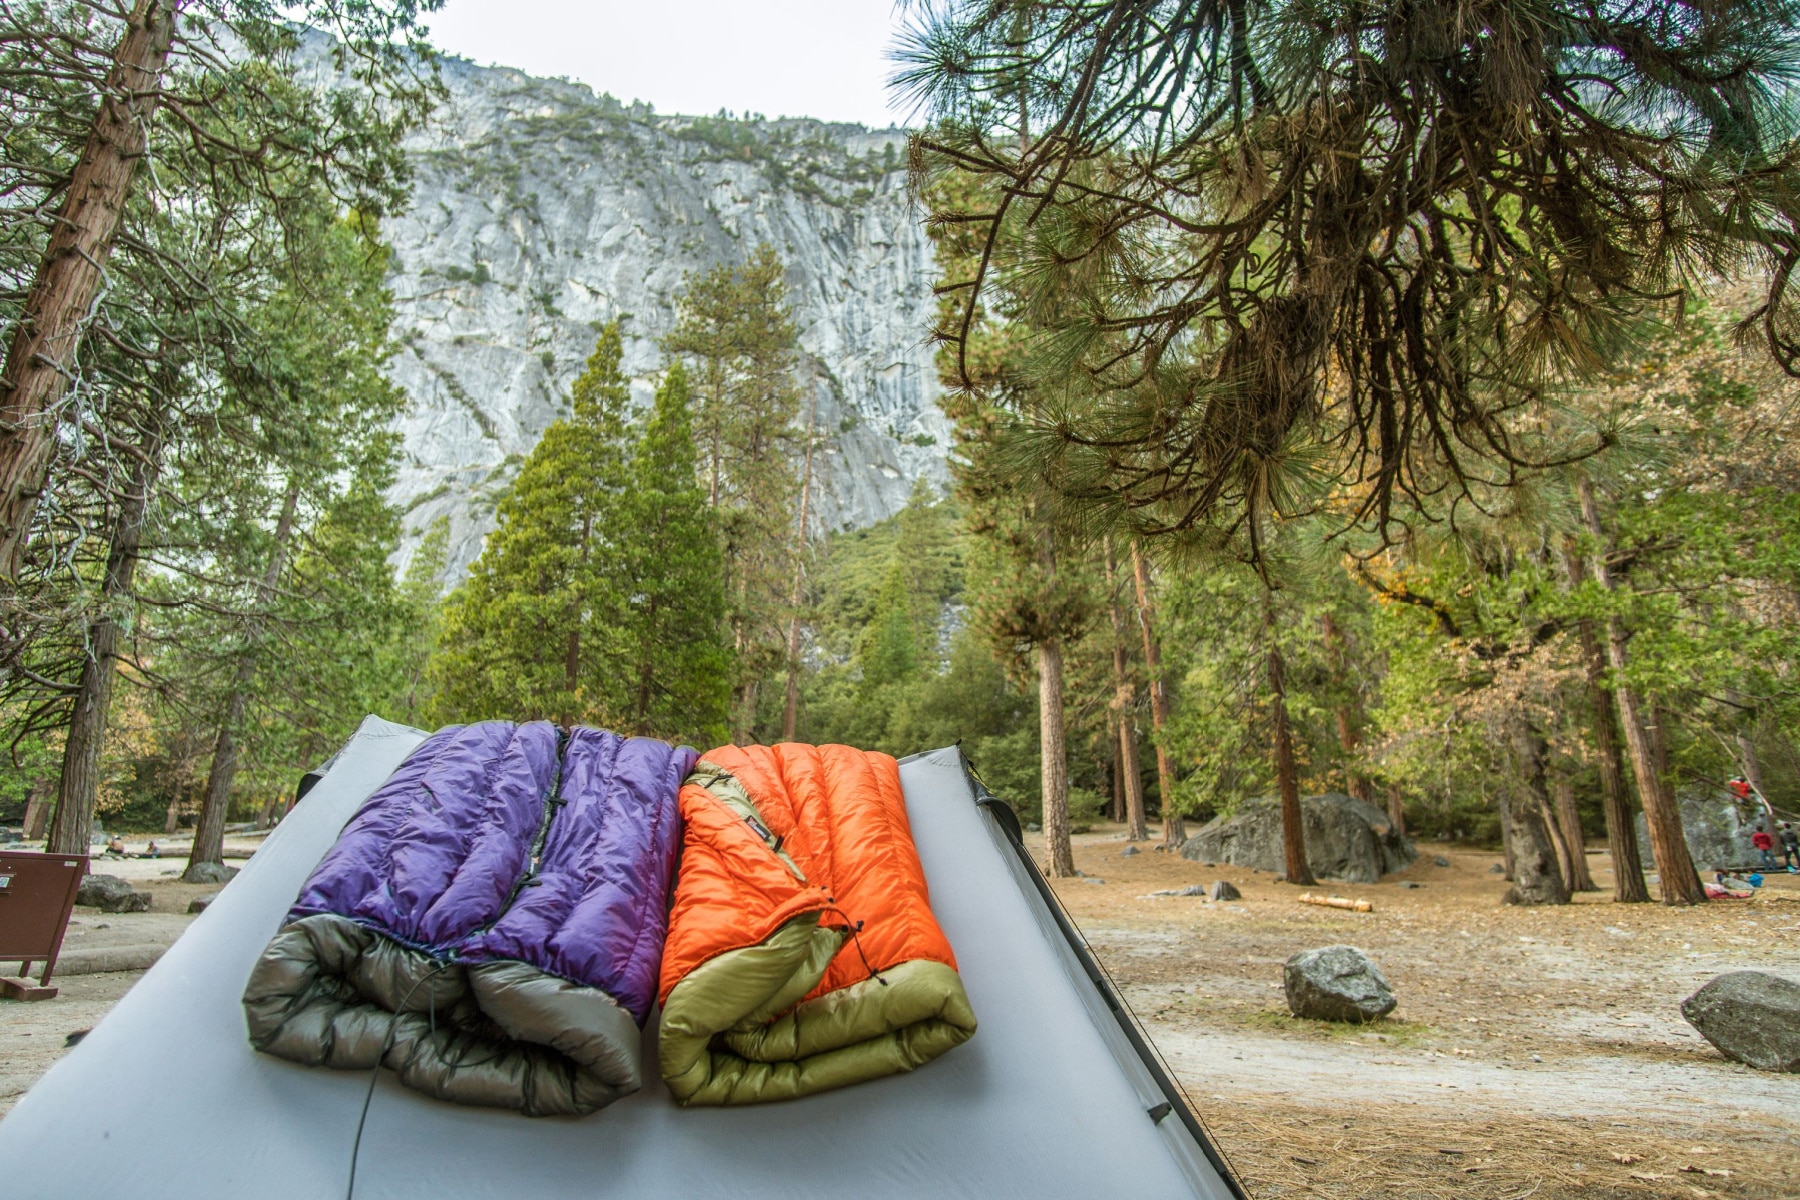 A tent and sleeping bags facing the forest and granite walls of Yosemite.